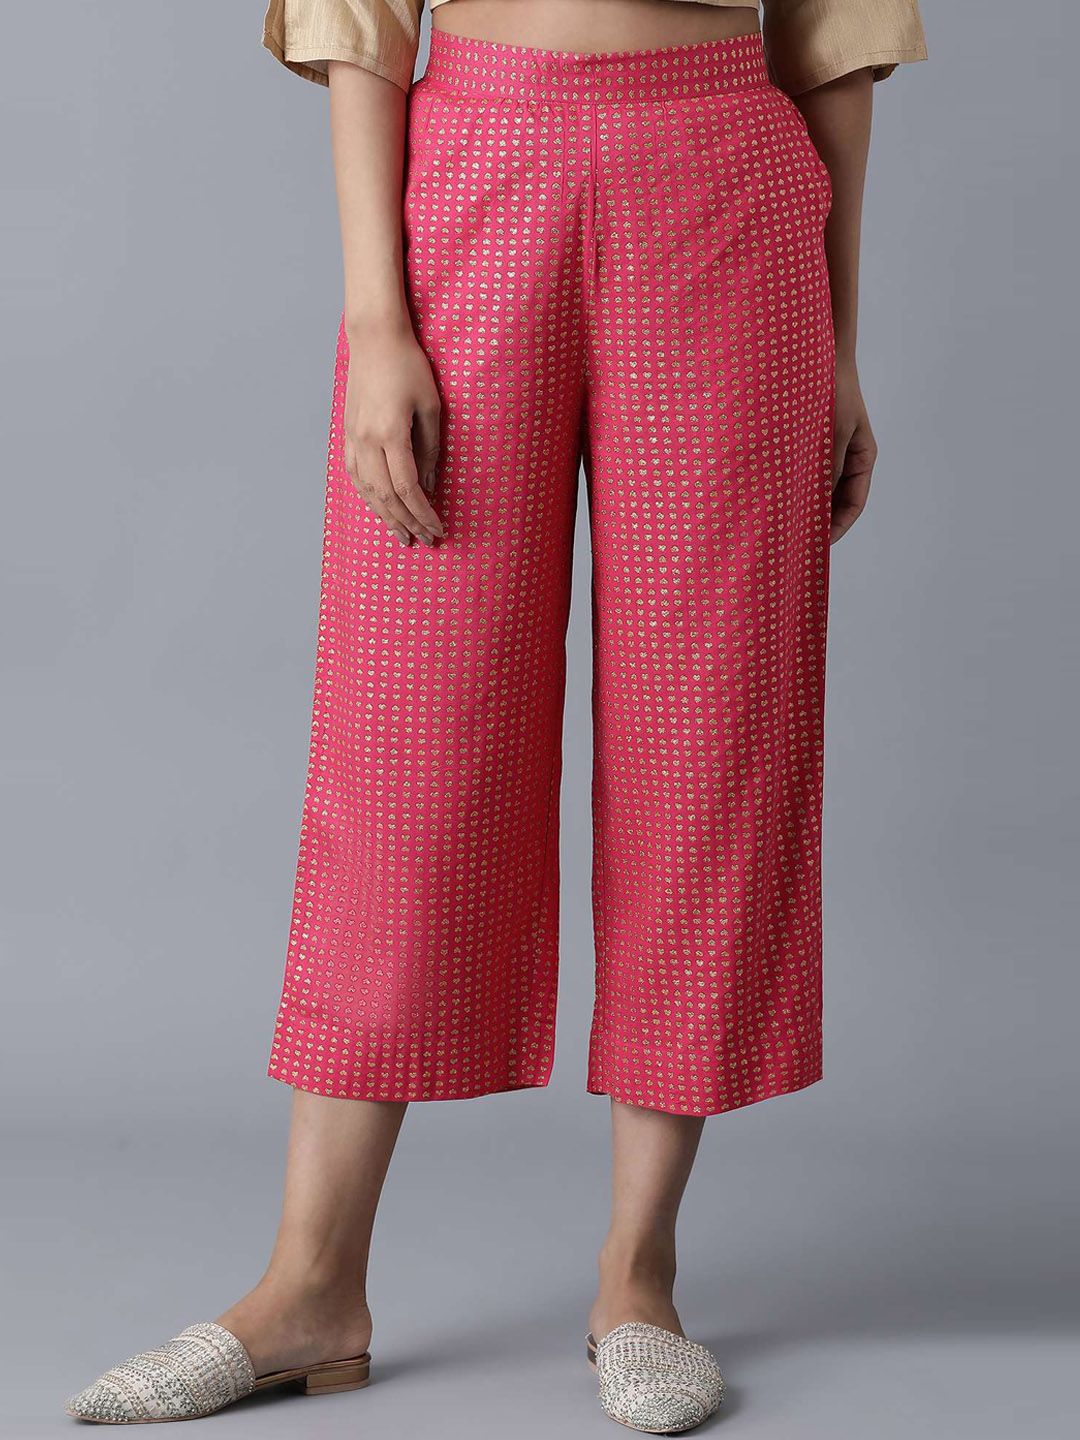 elleven Women Red & Gold Printed Culottes Trousers Price in India